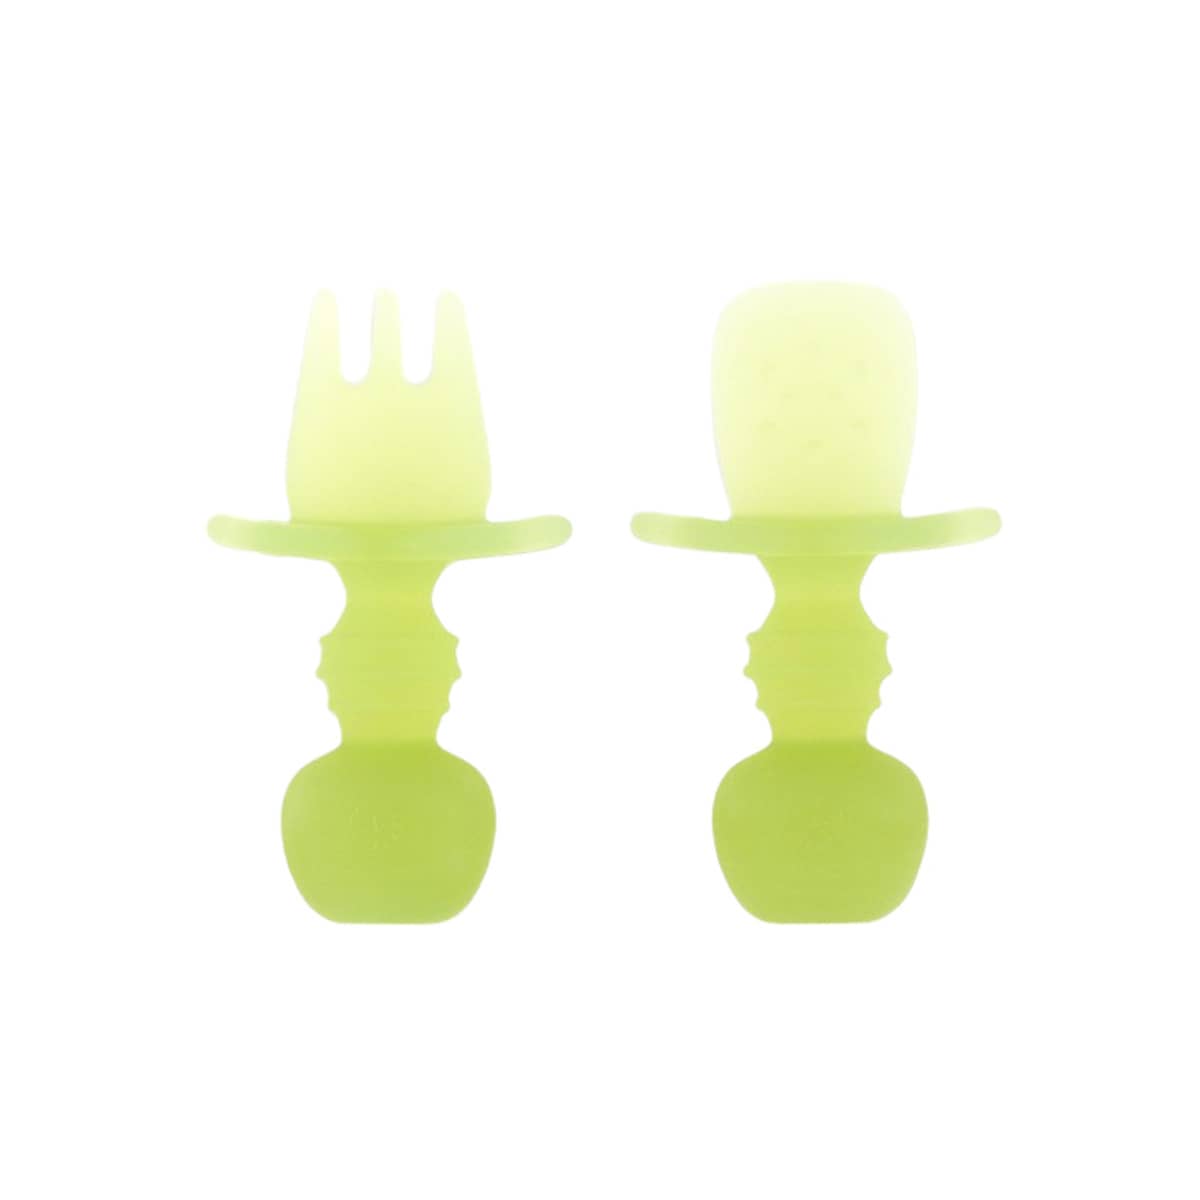 Bumkins Silicone Chewtensils - Jelly Silicone - Green